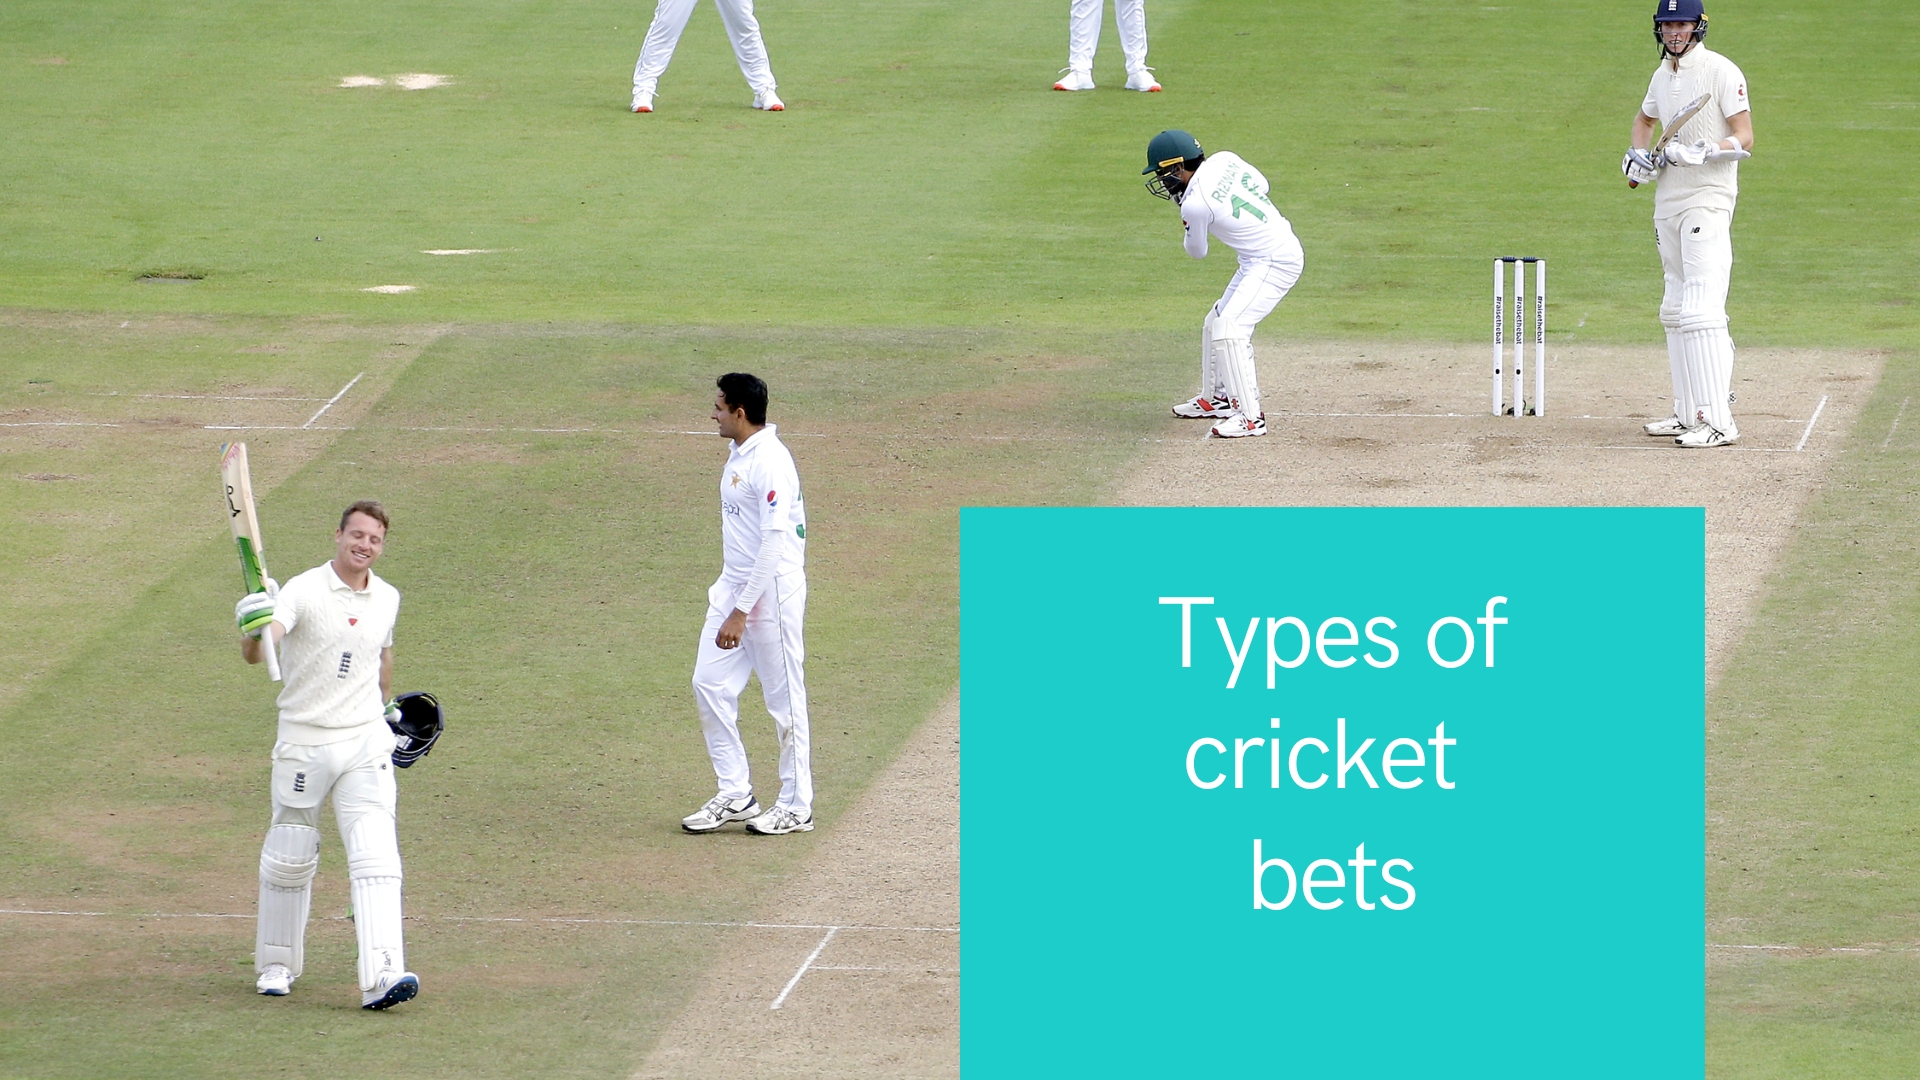 Types of cricket bets